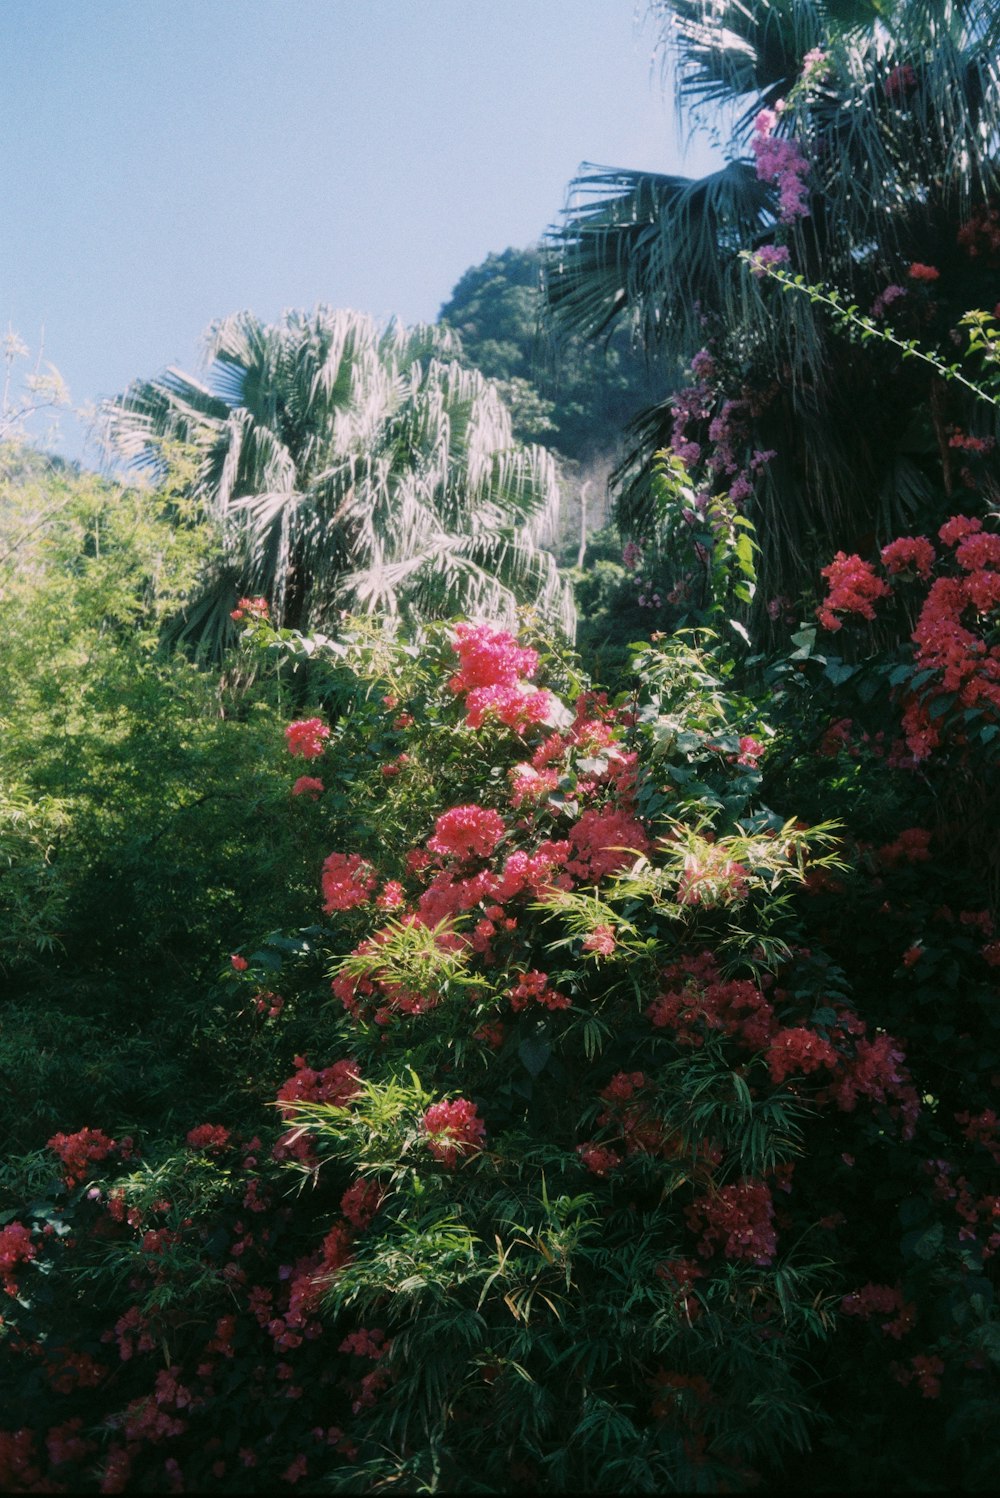 a bush with pink flowers and palm trees in the background